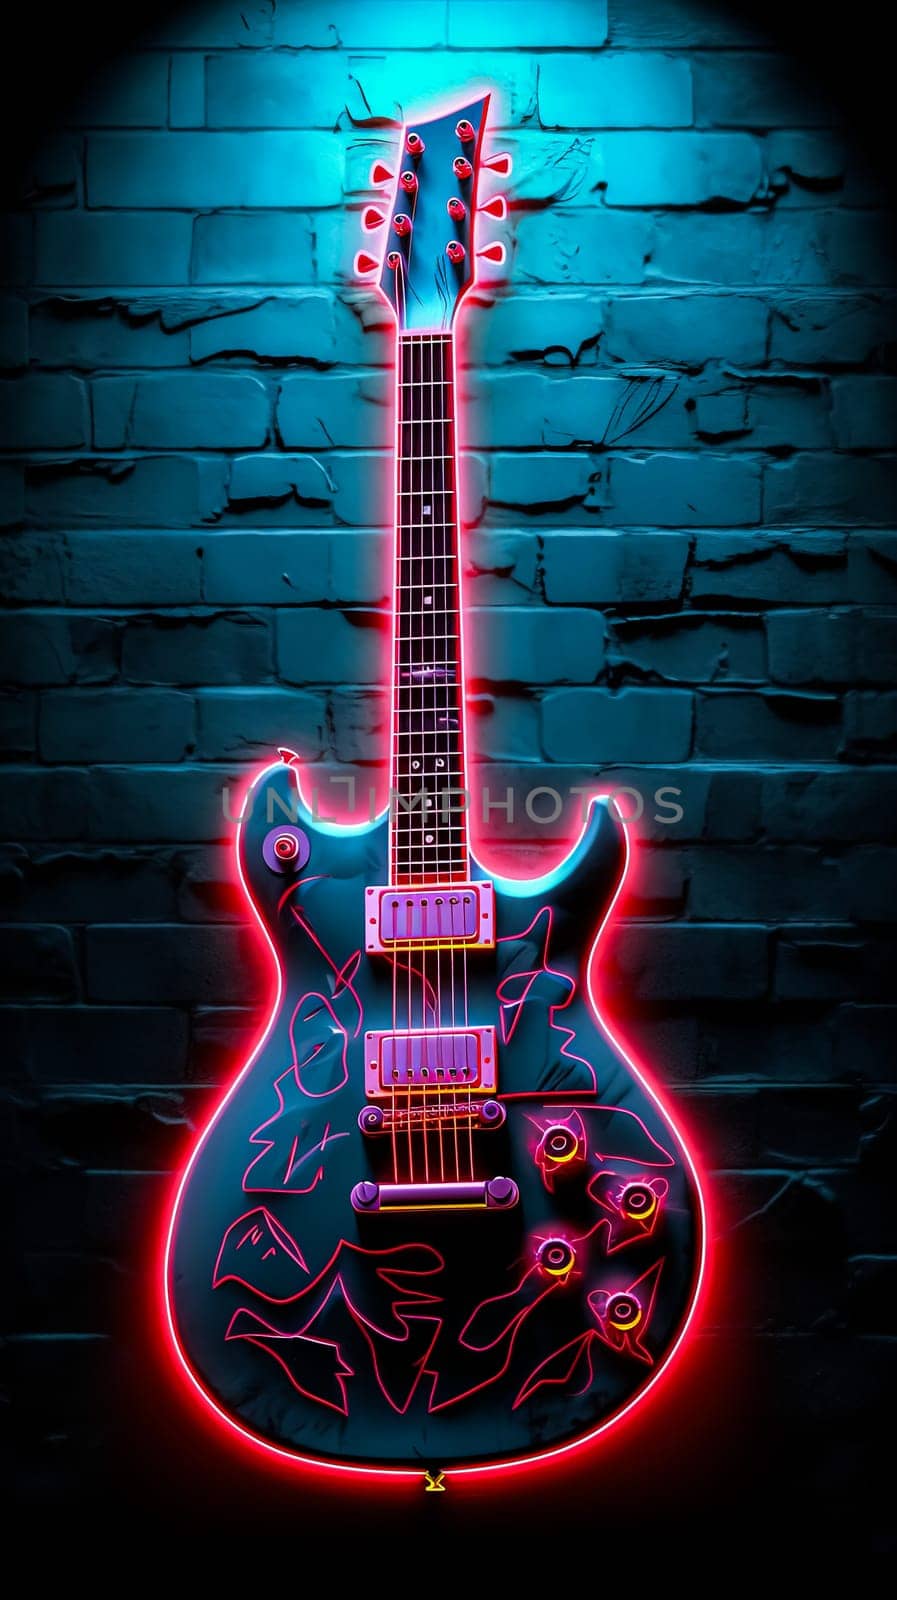 A colorful guitar is shown in a photo with smoke in the background. by Alla_Morozova93